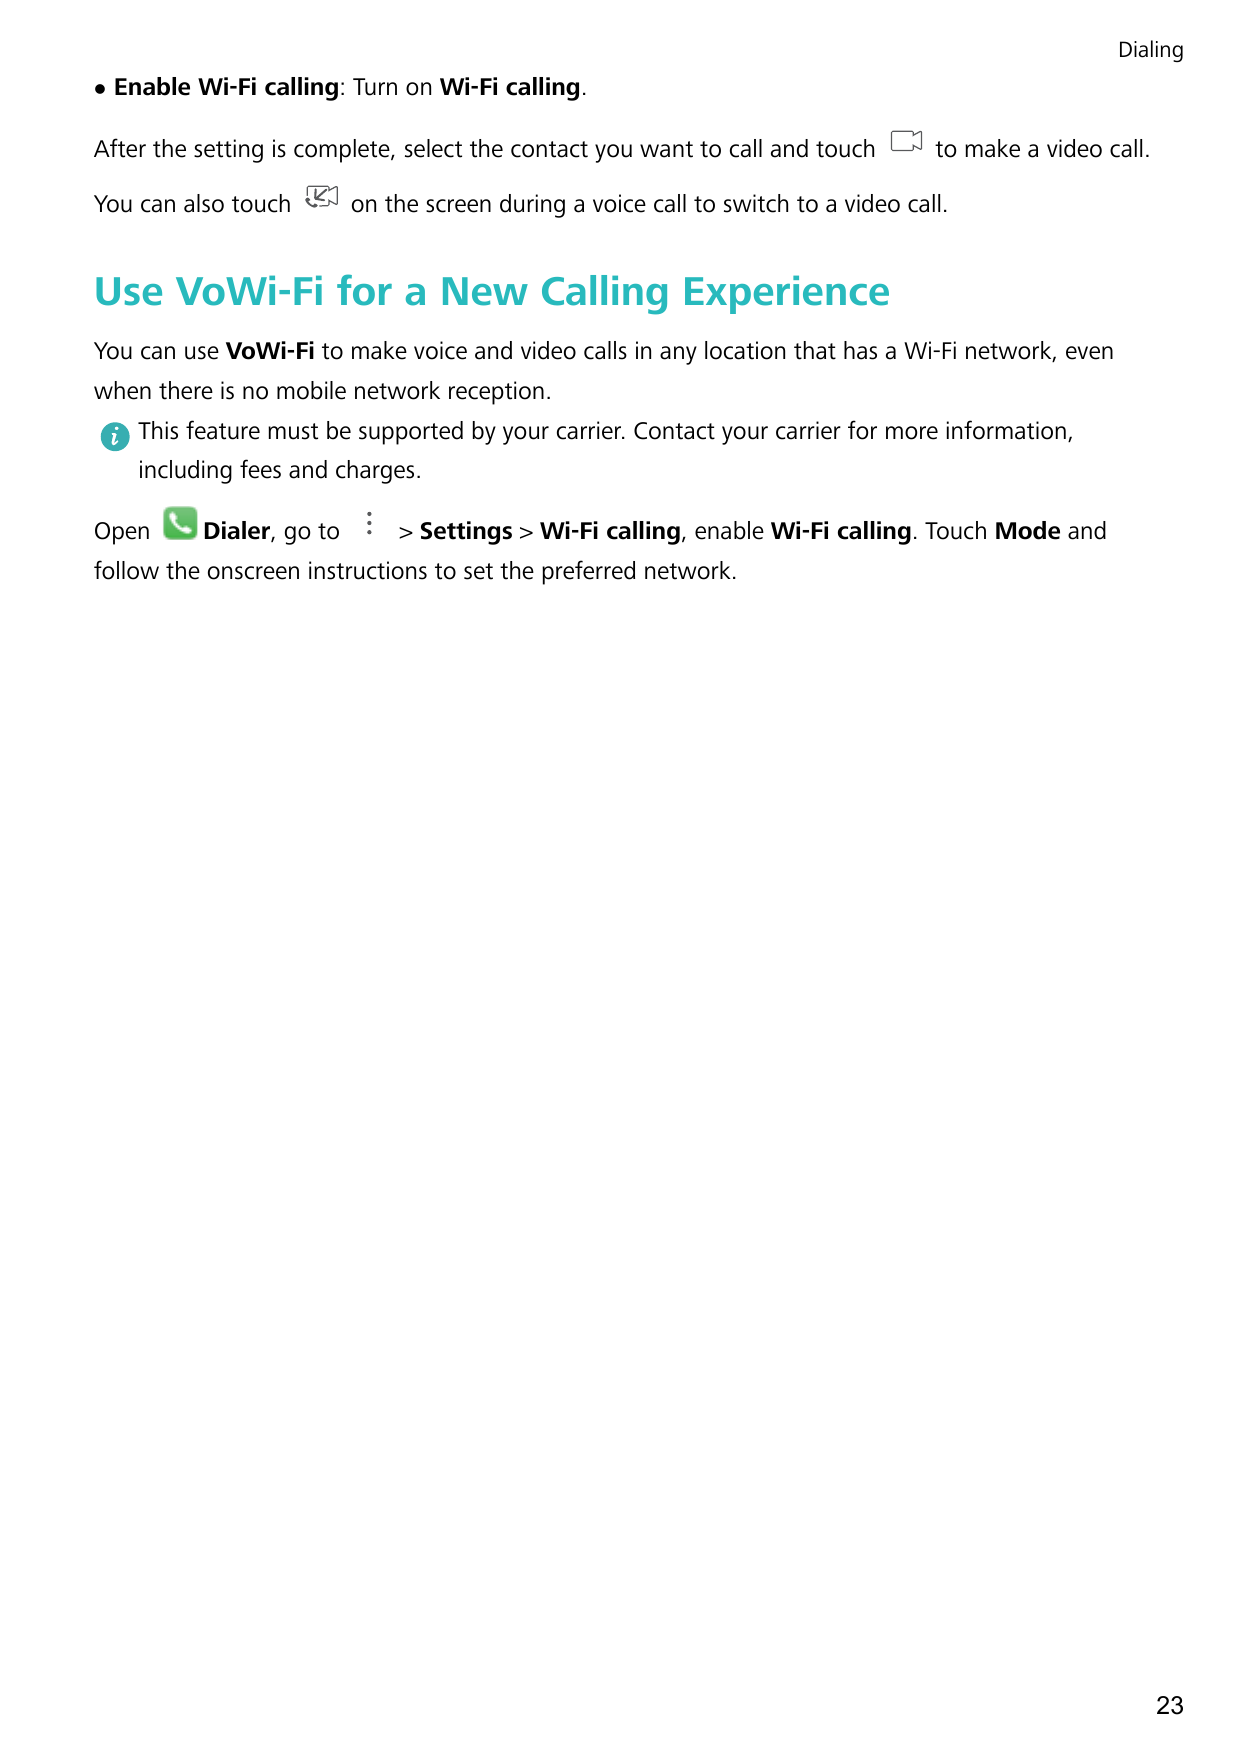 DialinglEnable Wi-Fi calling: Turn on Wi-Fi calling.After the setting is complete, select the contact you want to call and touch